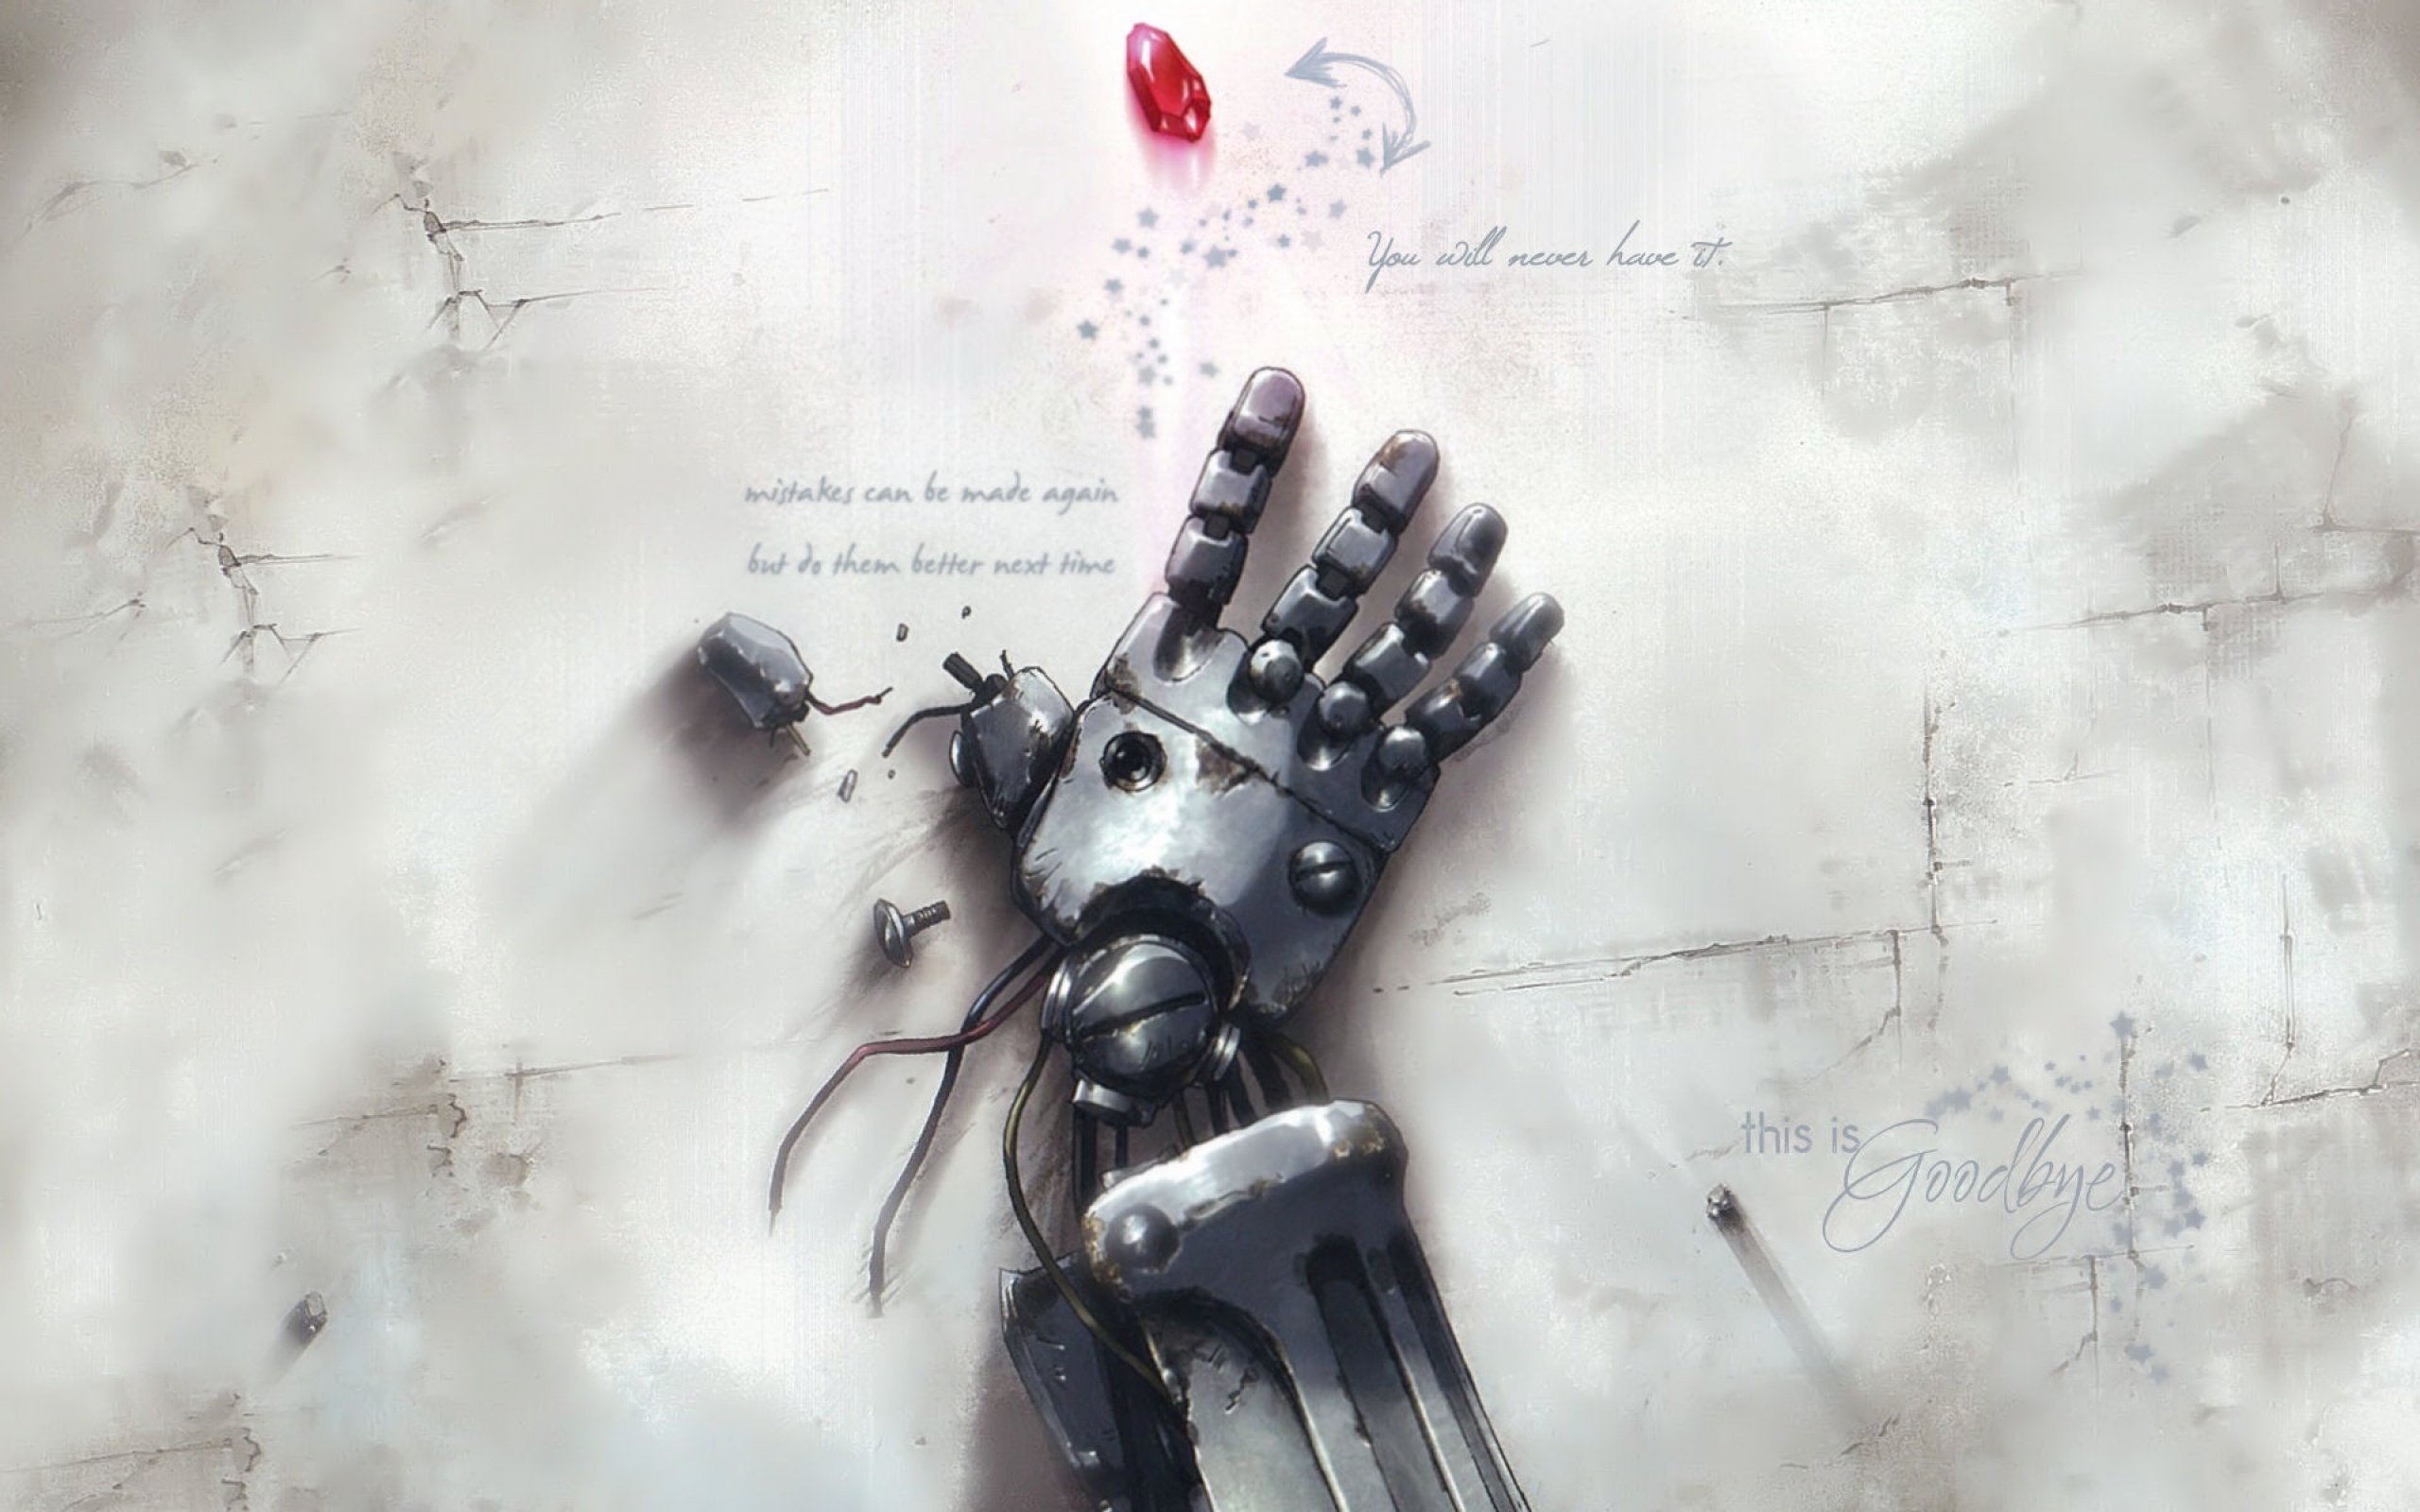 Desktop wallpaper featuring the anime character Iron Hand from FullMetal Alchemist.